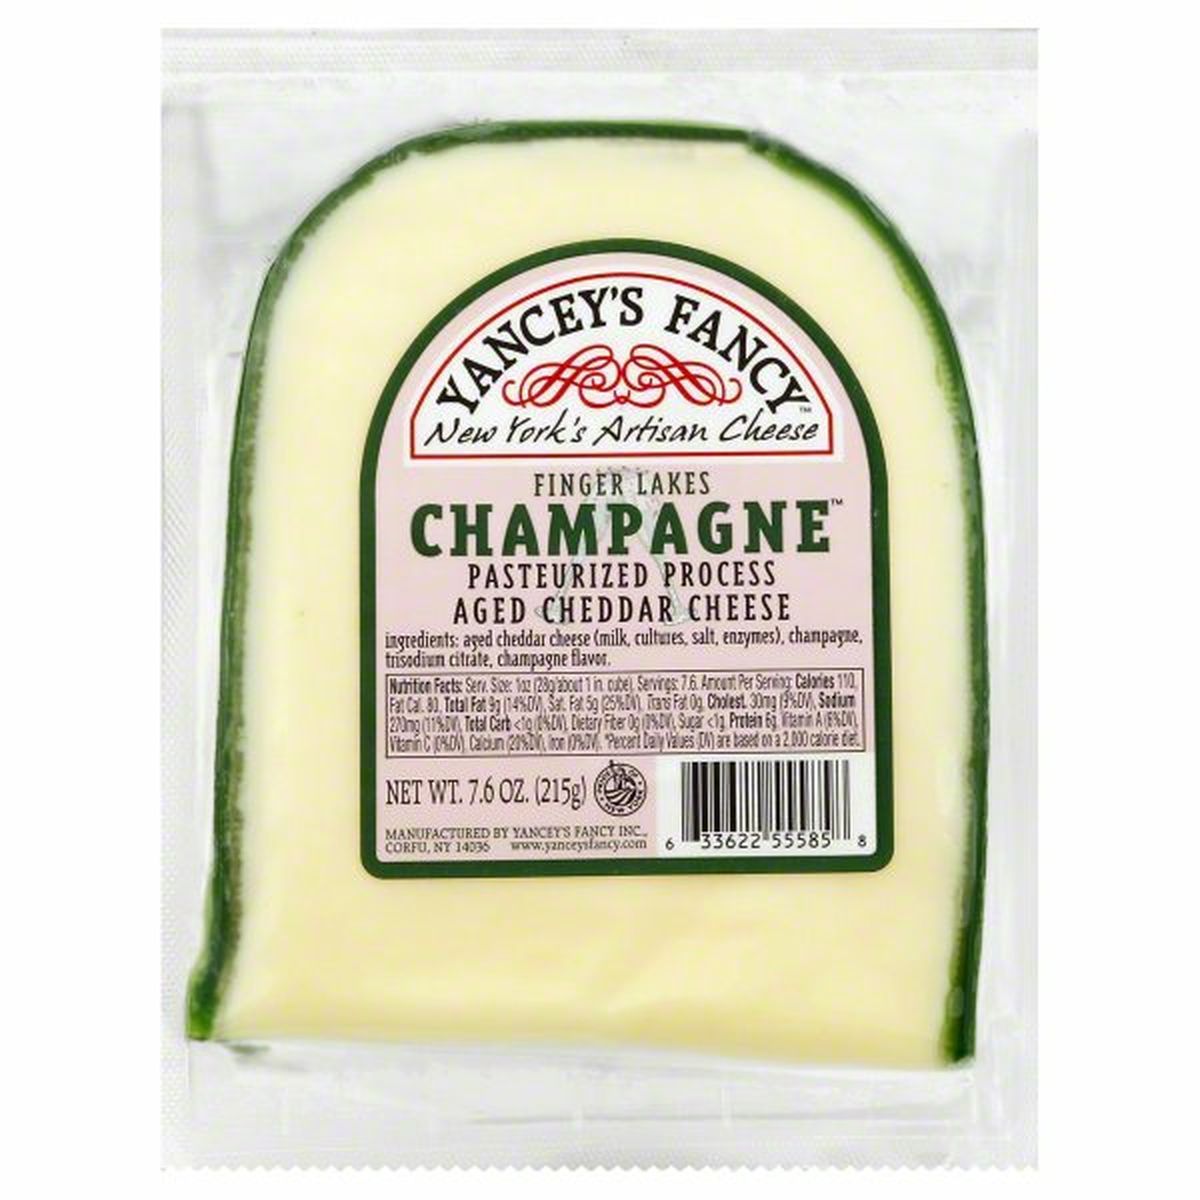 Calories in Yancey's Fancy Cheese, Pasteurized Process Aged Cheddar, Finger Lakes Champagne